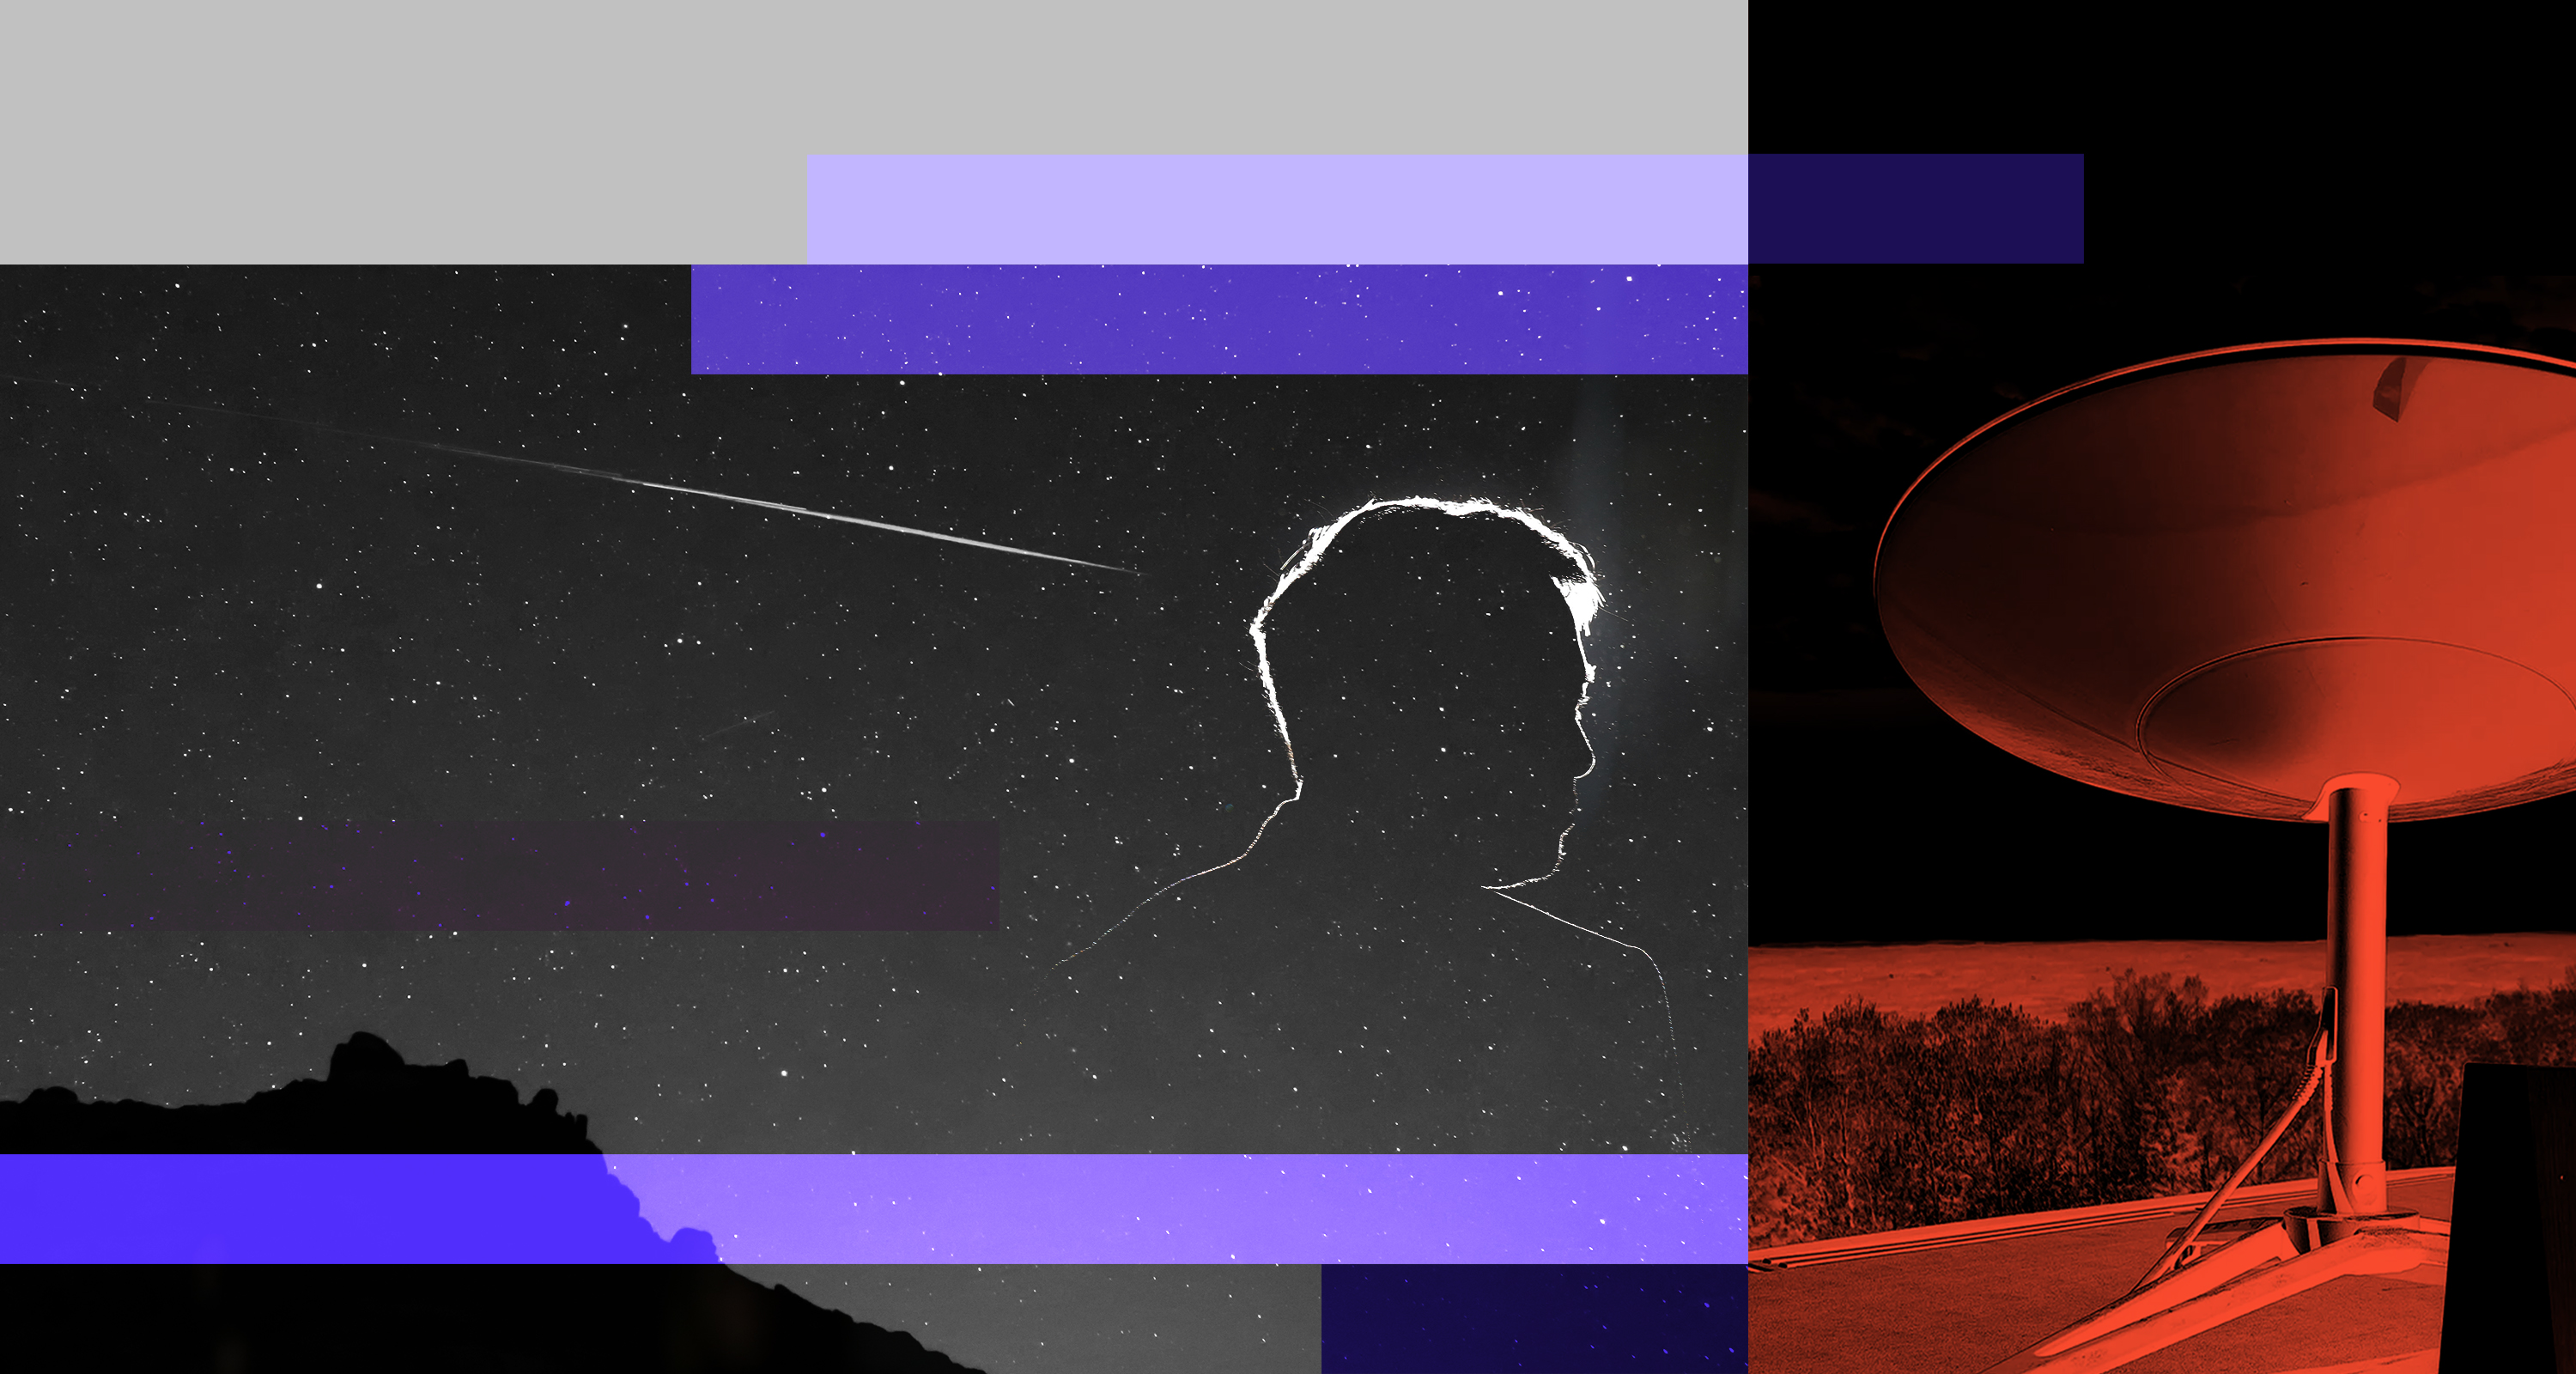 A photo-illustration of Elon Musk in silhouette in front of a night sky with a streak of light and beside a satellite dish.